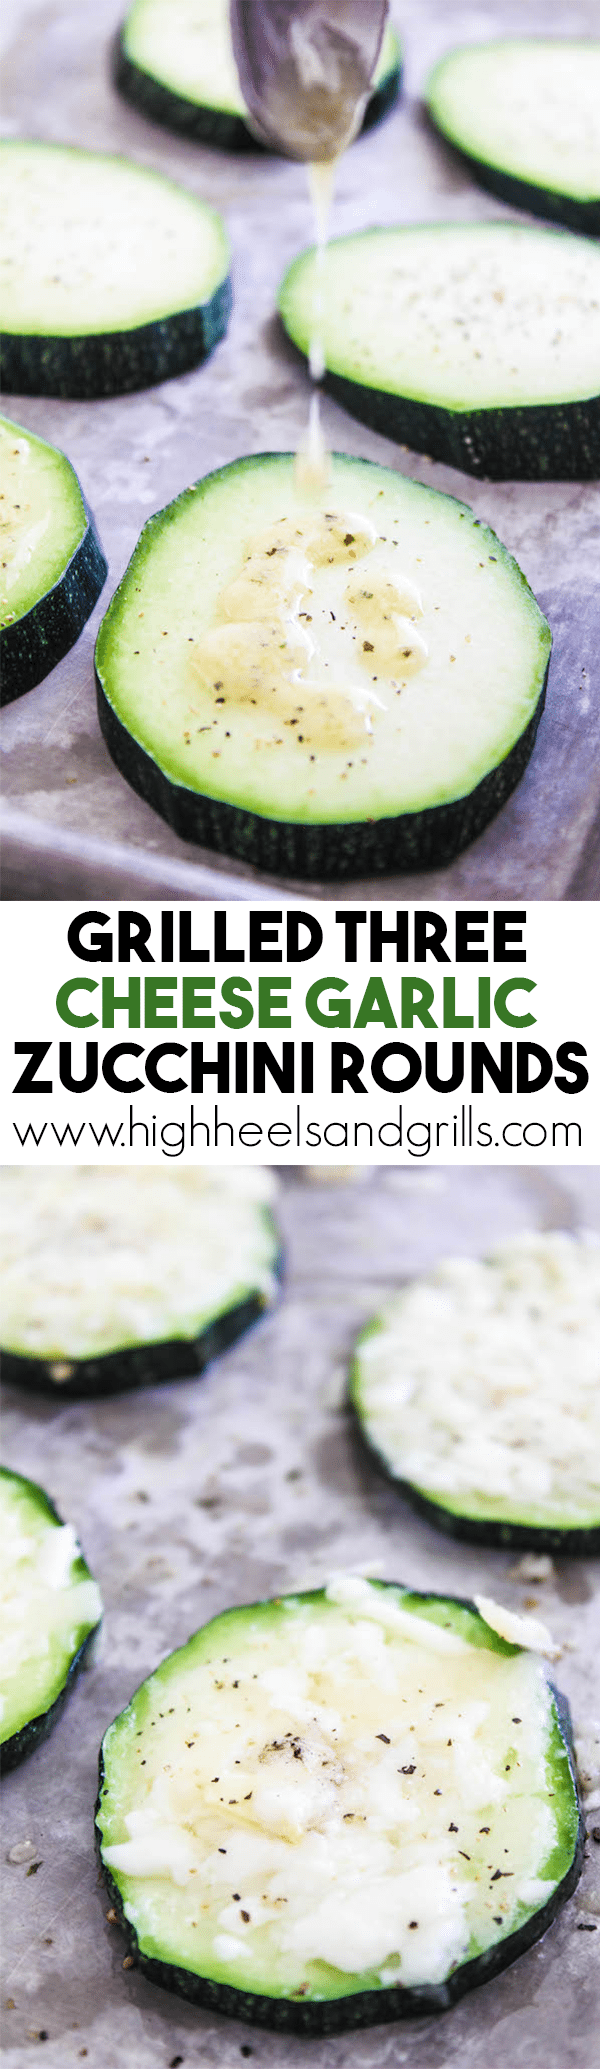 Three Cheese Grilled Zucchini Rounds - This is one of the tastiest and easiest grilling recipes I've ever had!